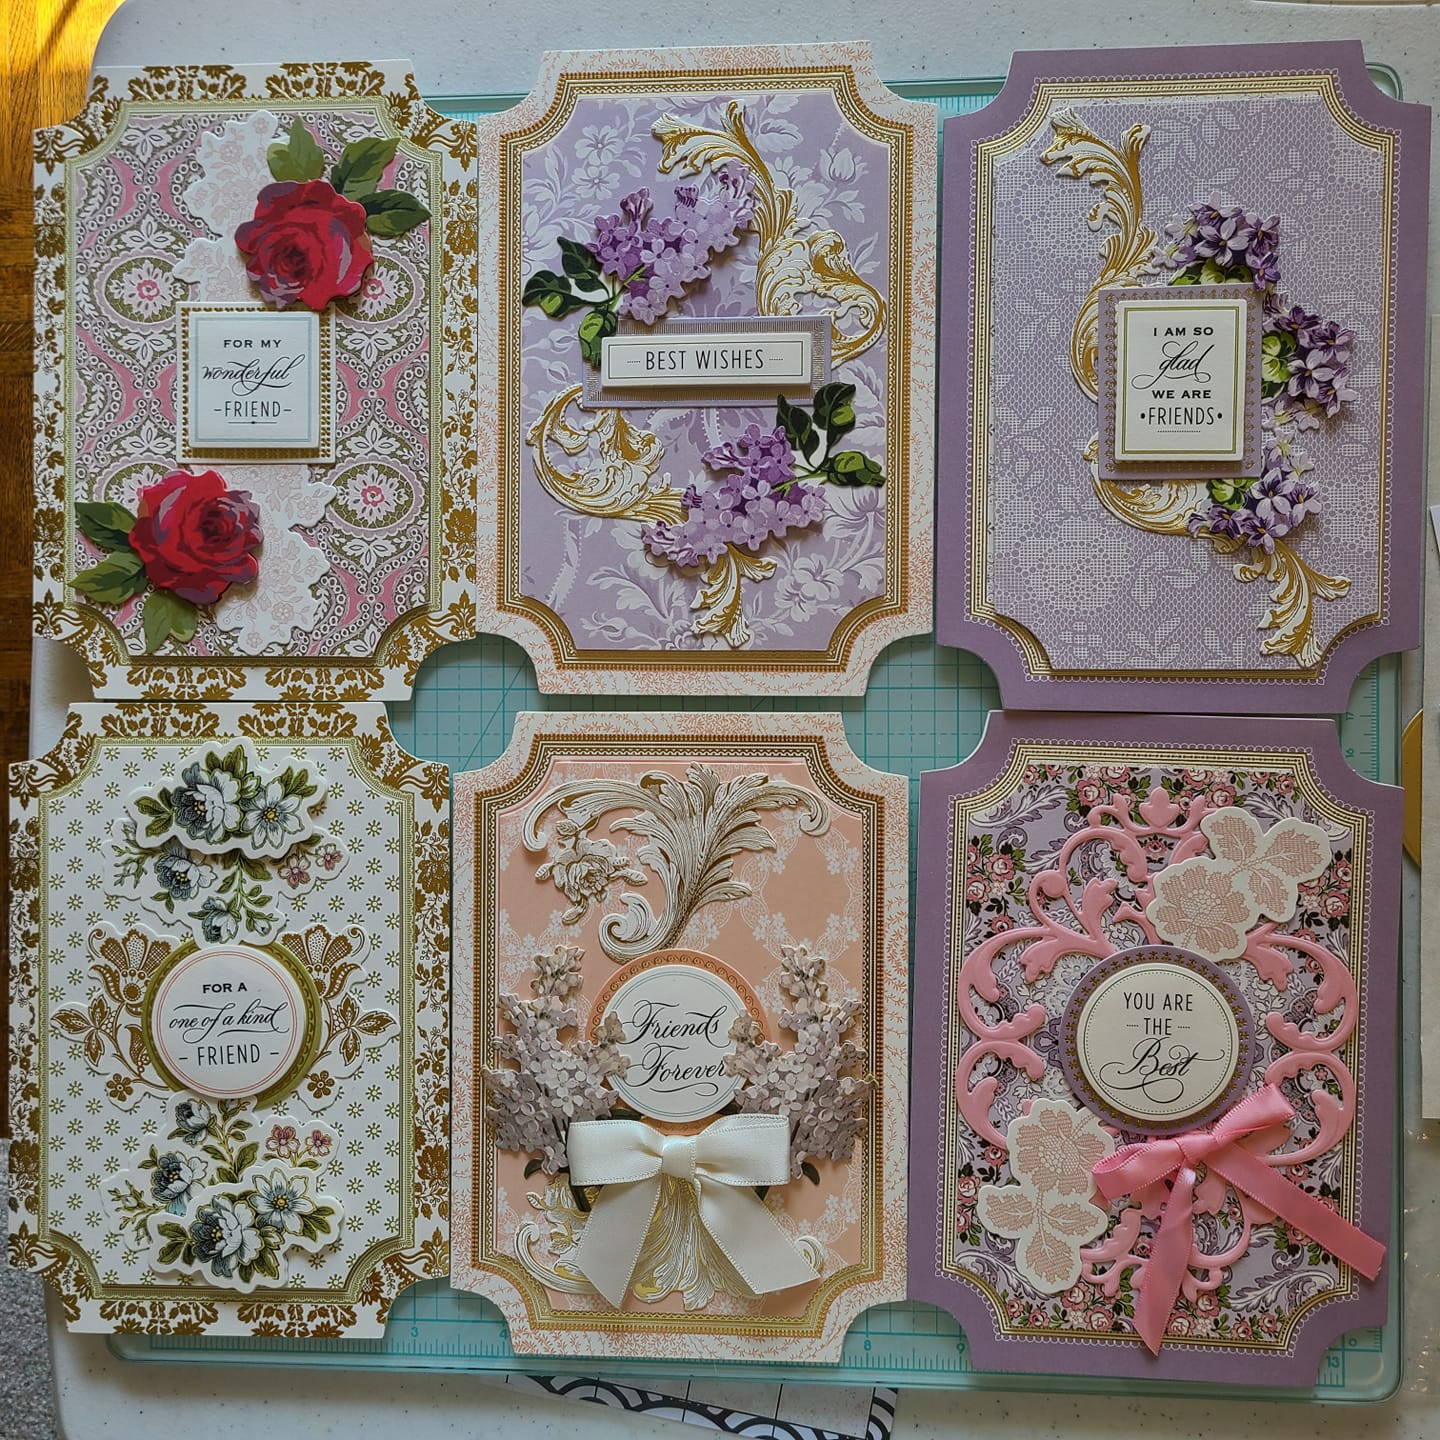 A set of cards with flowers and ribbons on them.